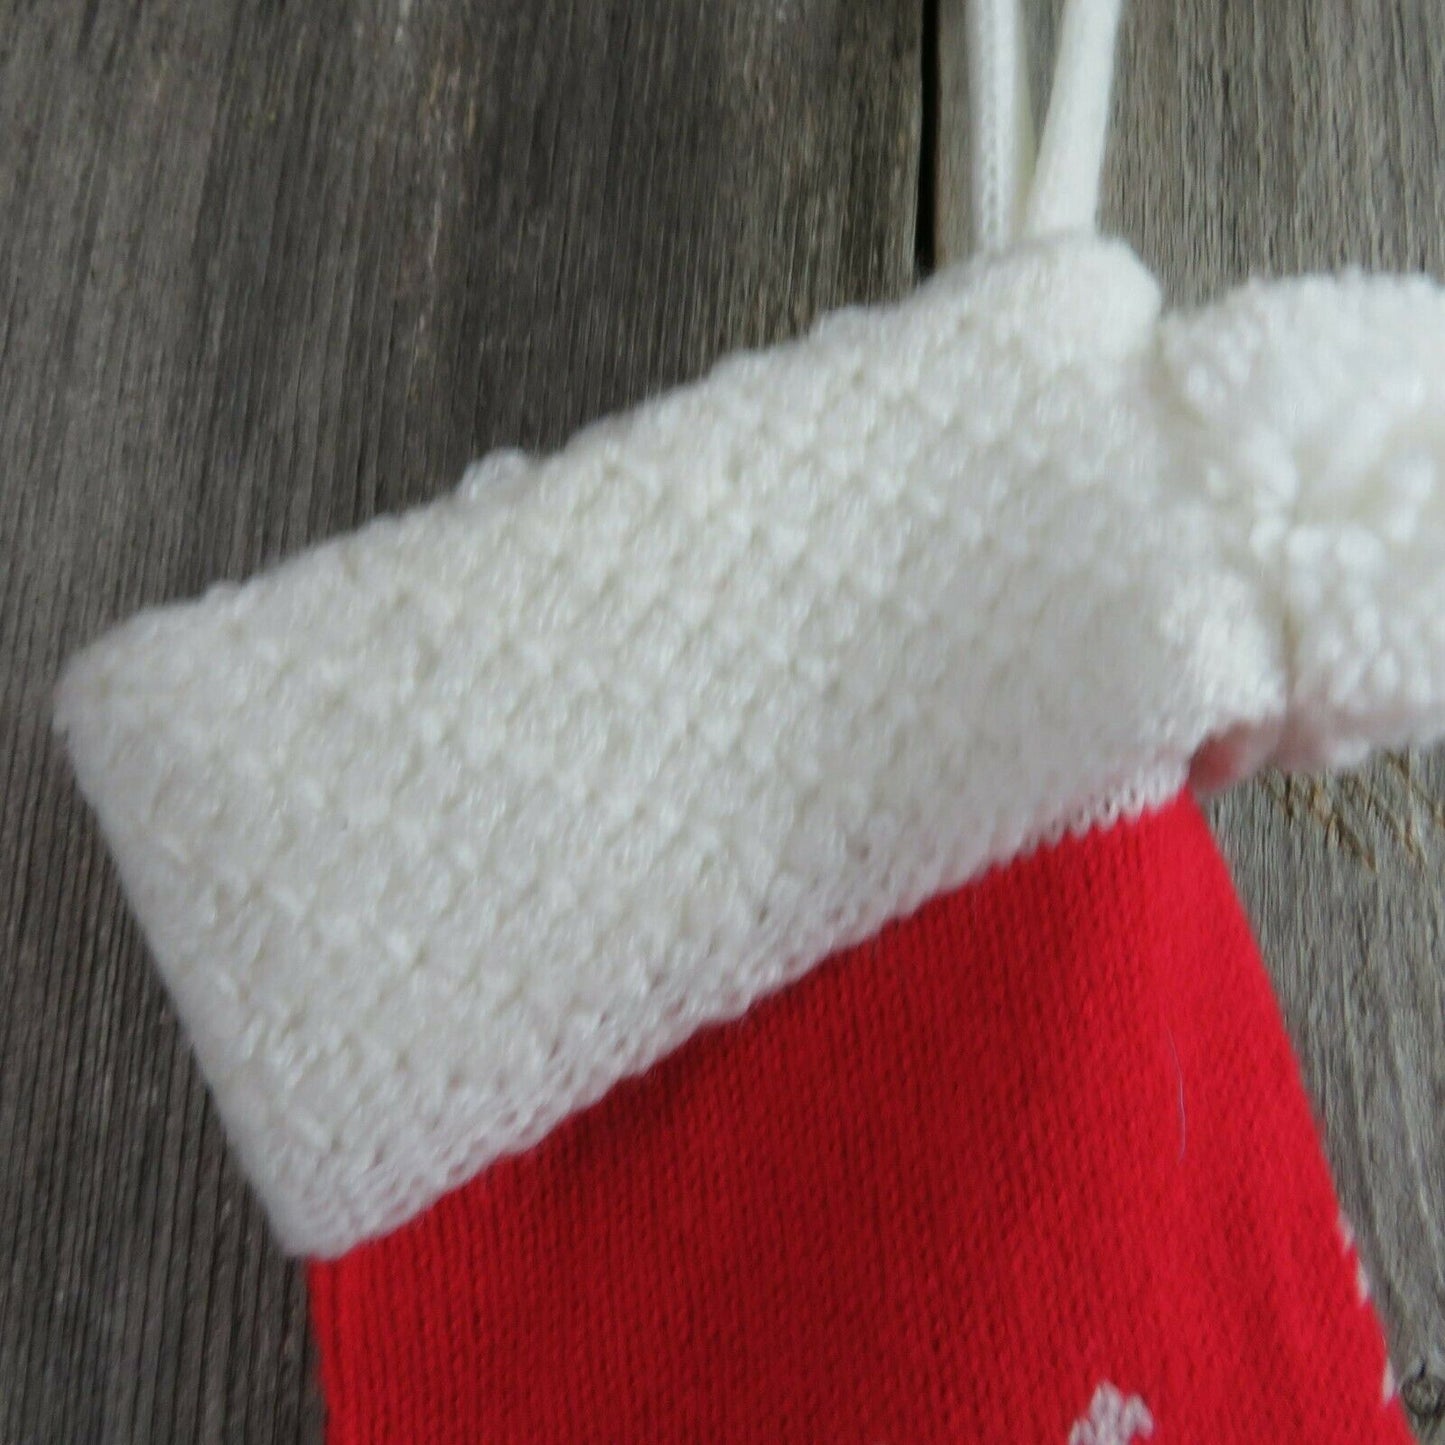 Vintage Christmas Tree Stocking Knitted Knit Green Red White Pom Pom - At Grandma's Table